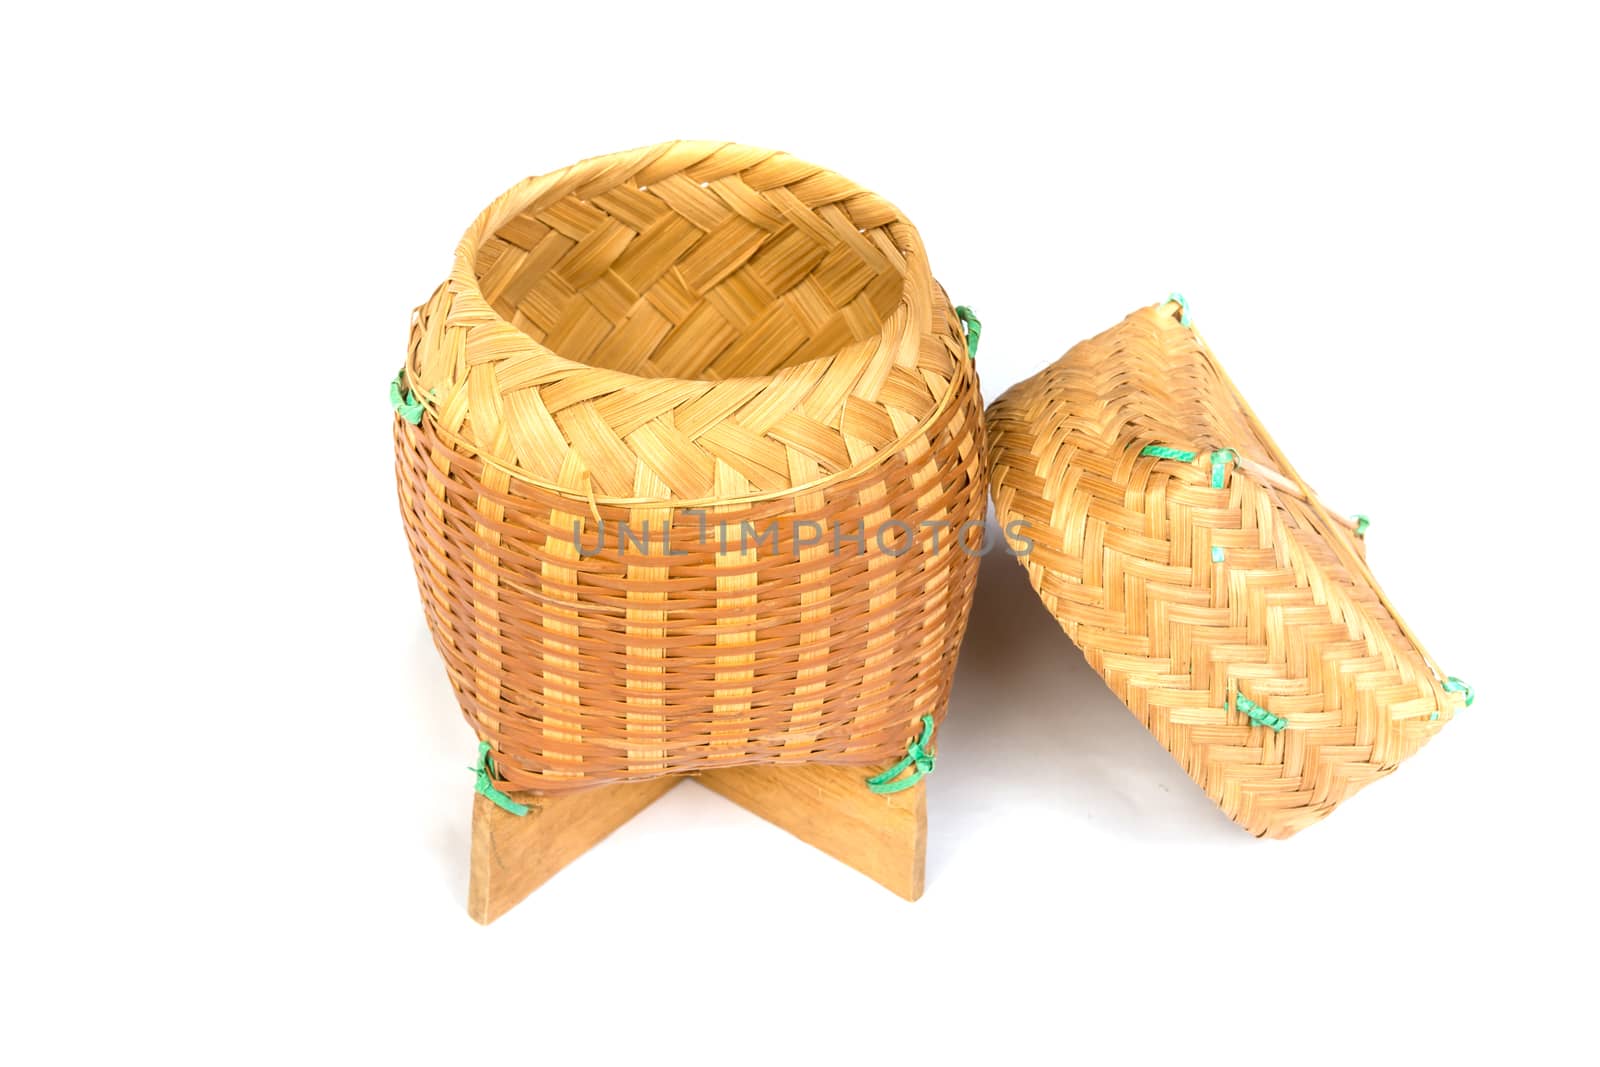 "Kratip" bamboo textile, sticky rice container, local North Eastern and Northern Thailand